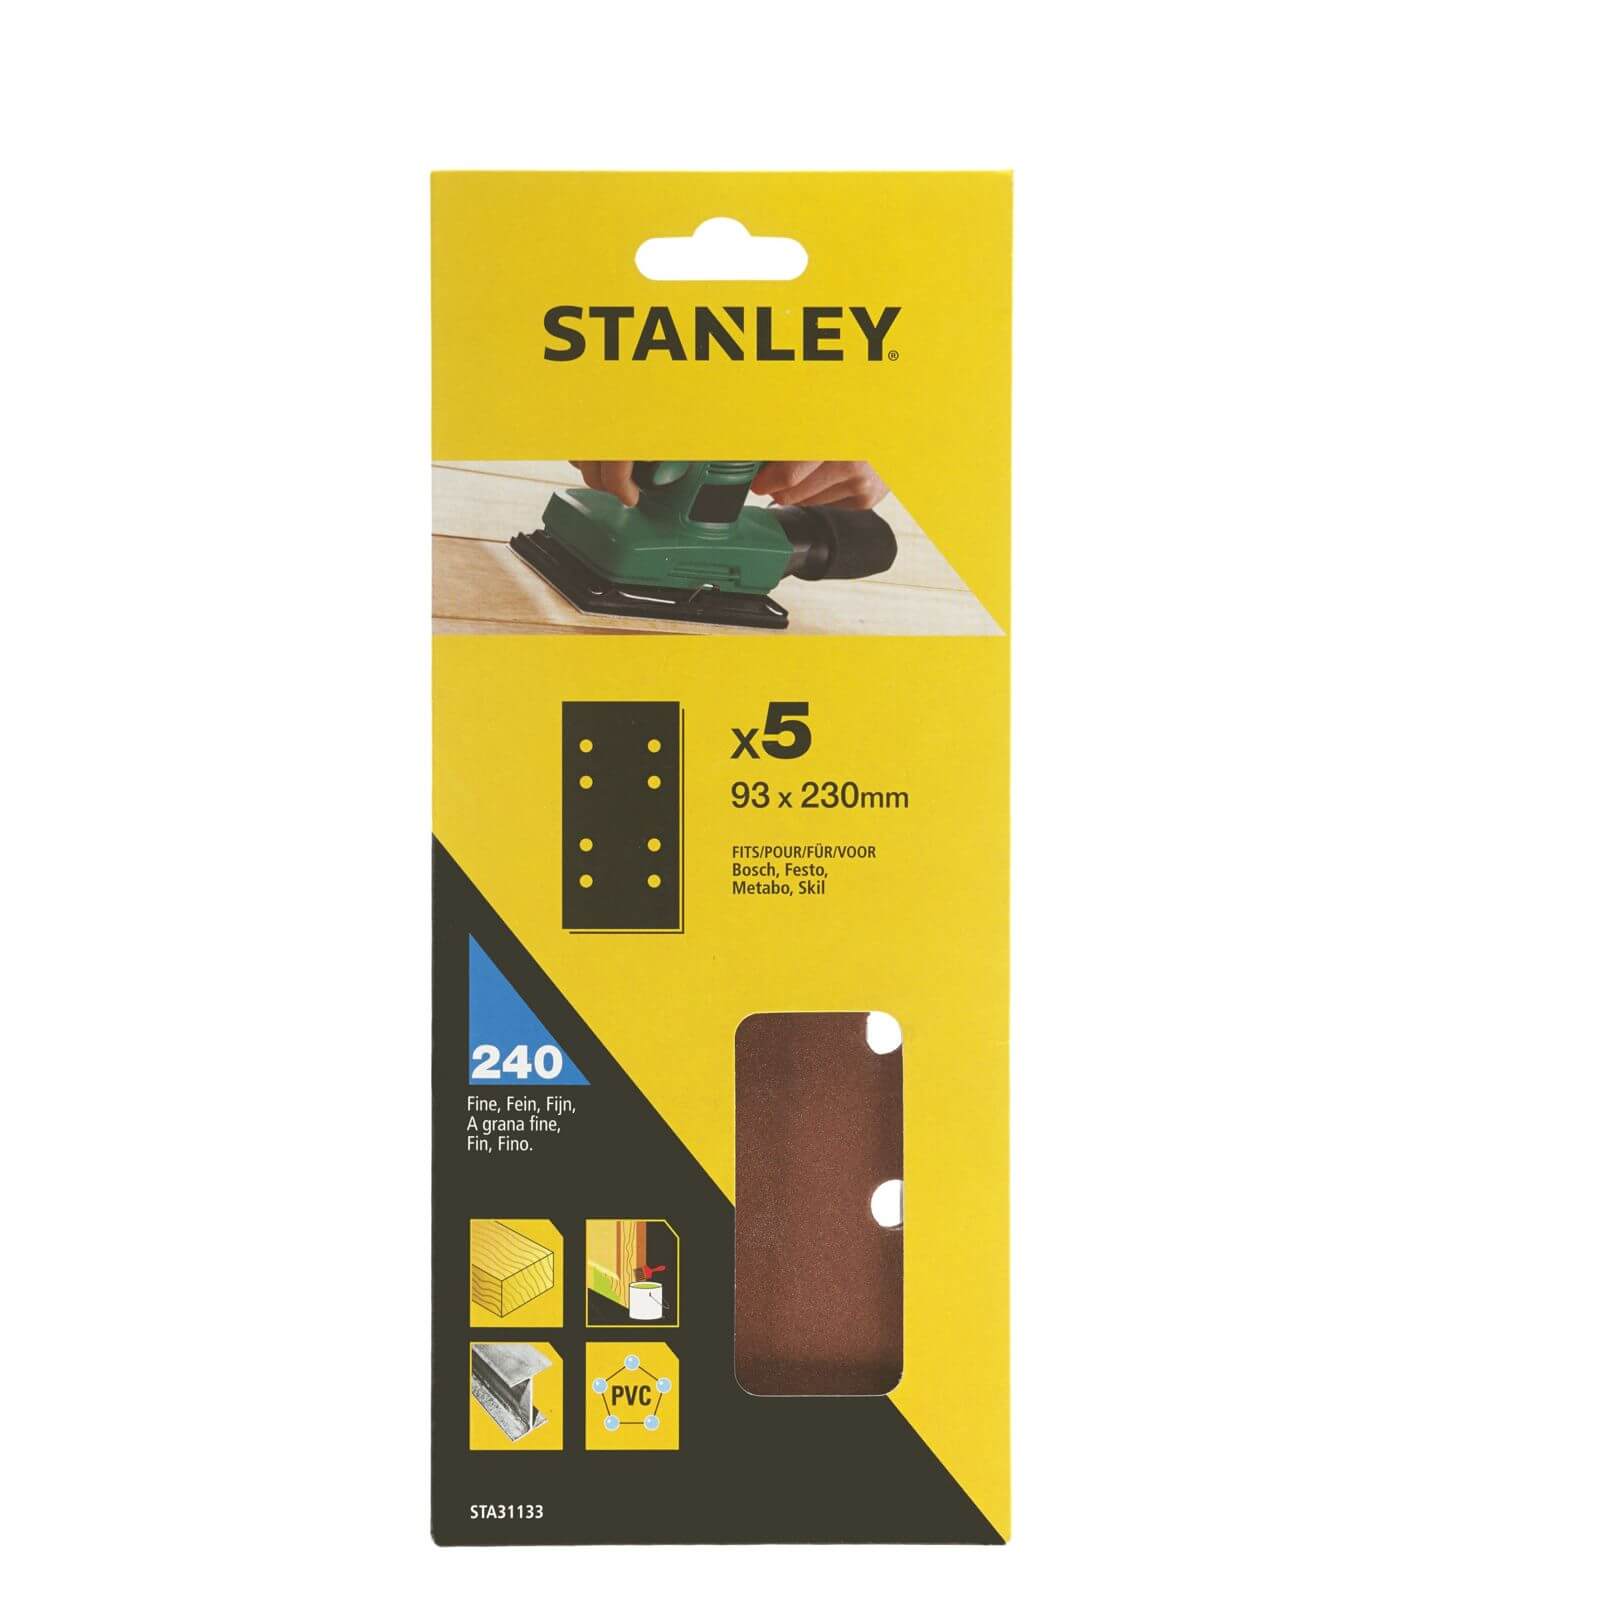 Photo of Stanley 1/3 Sheet Sander Punched Wire Clip 240g Sanding Sheets